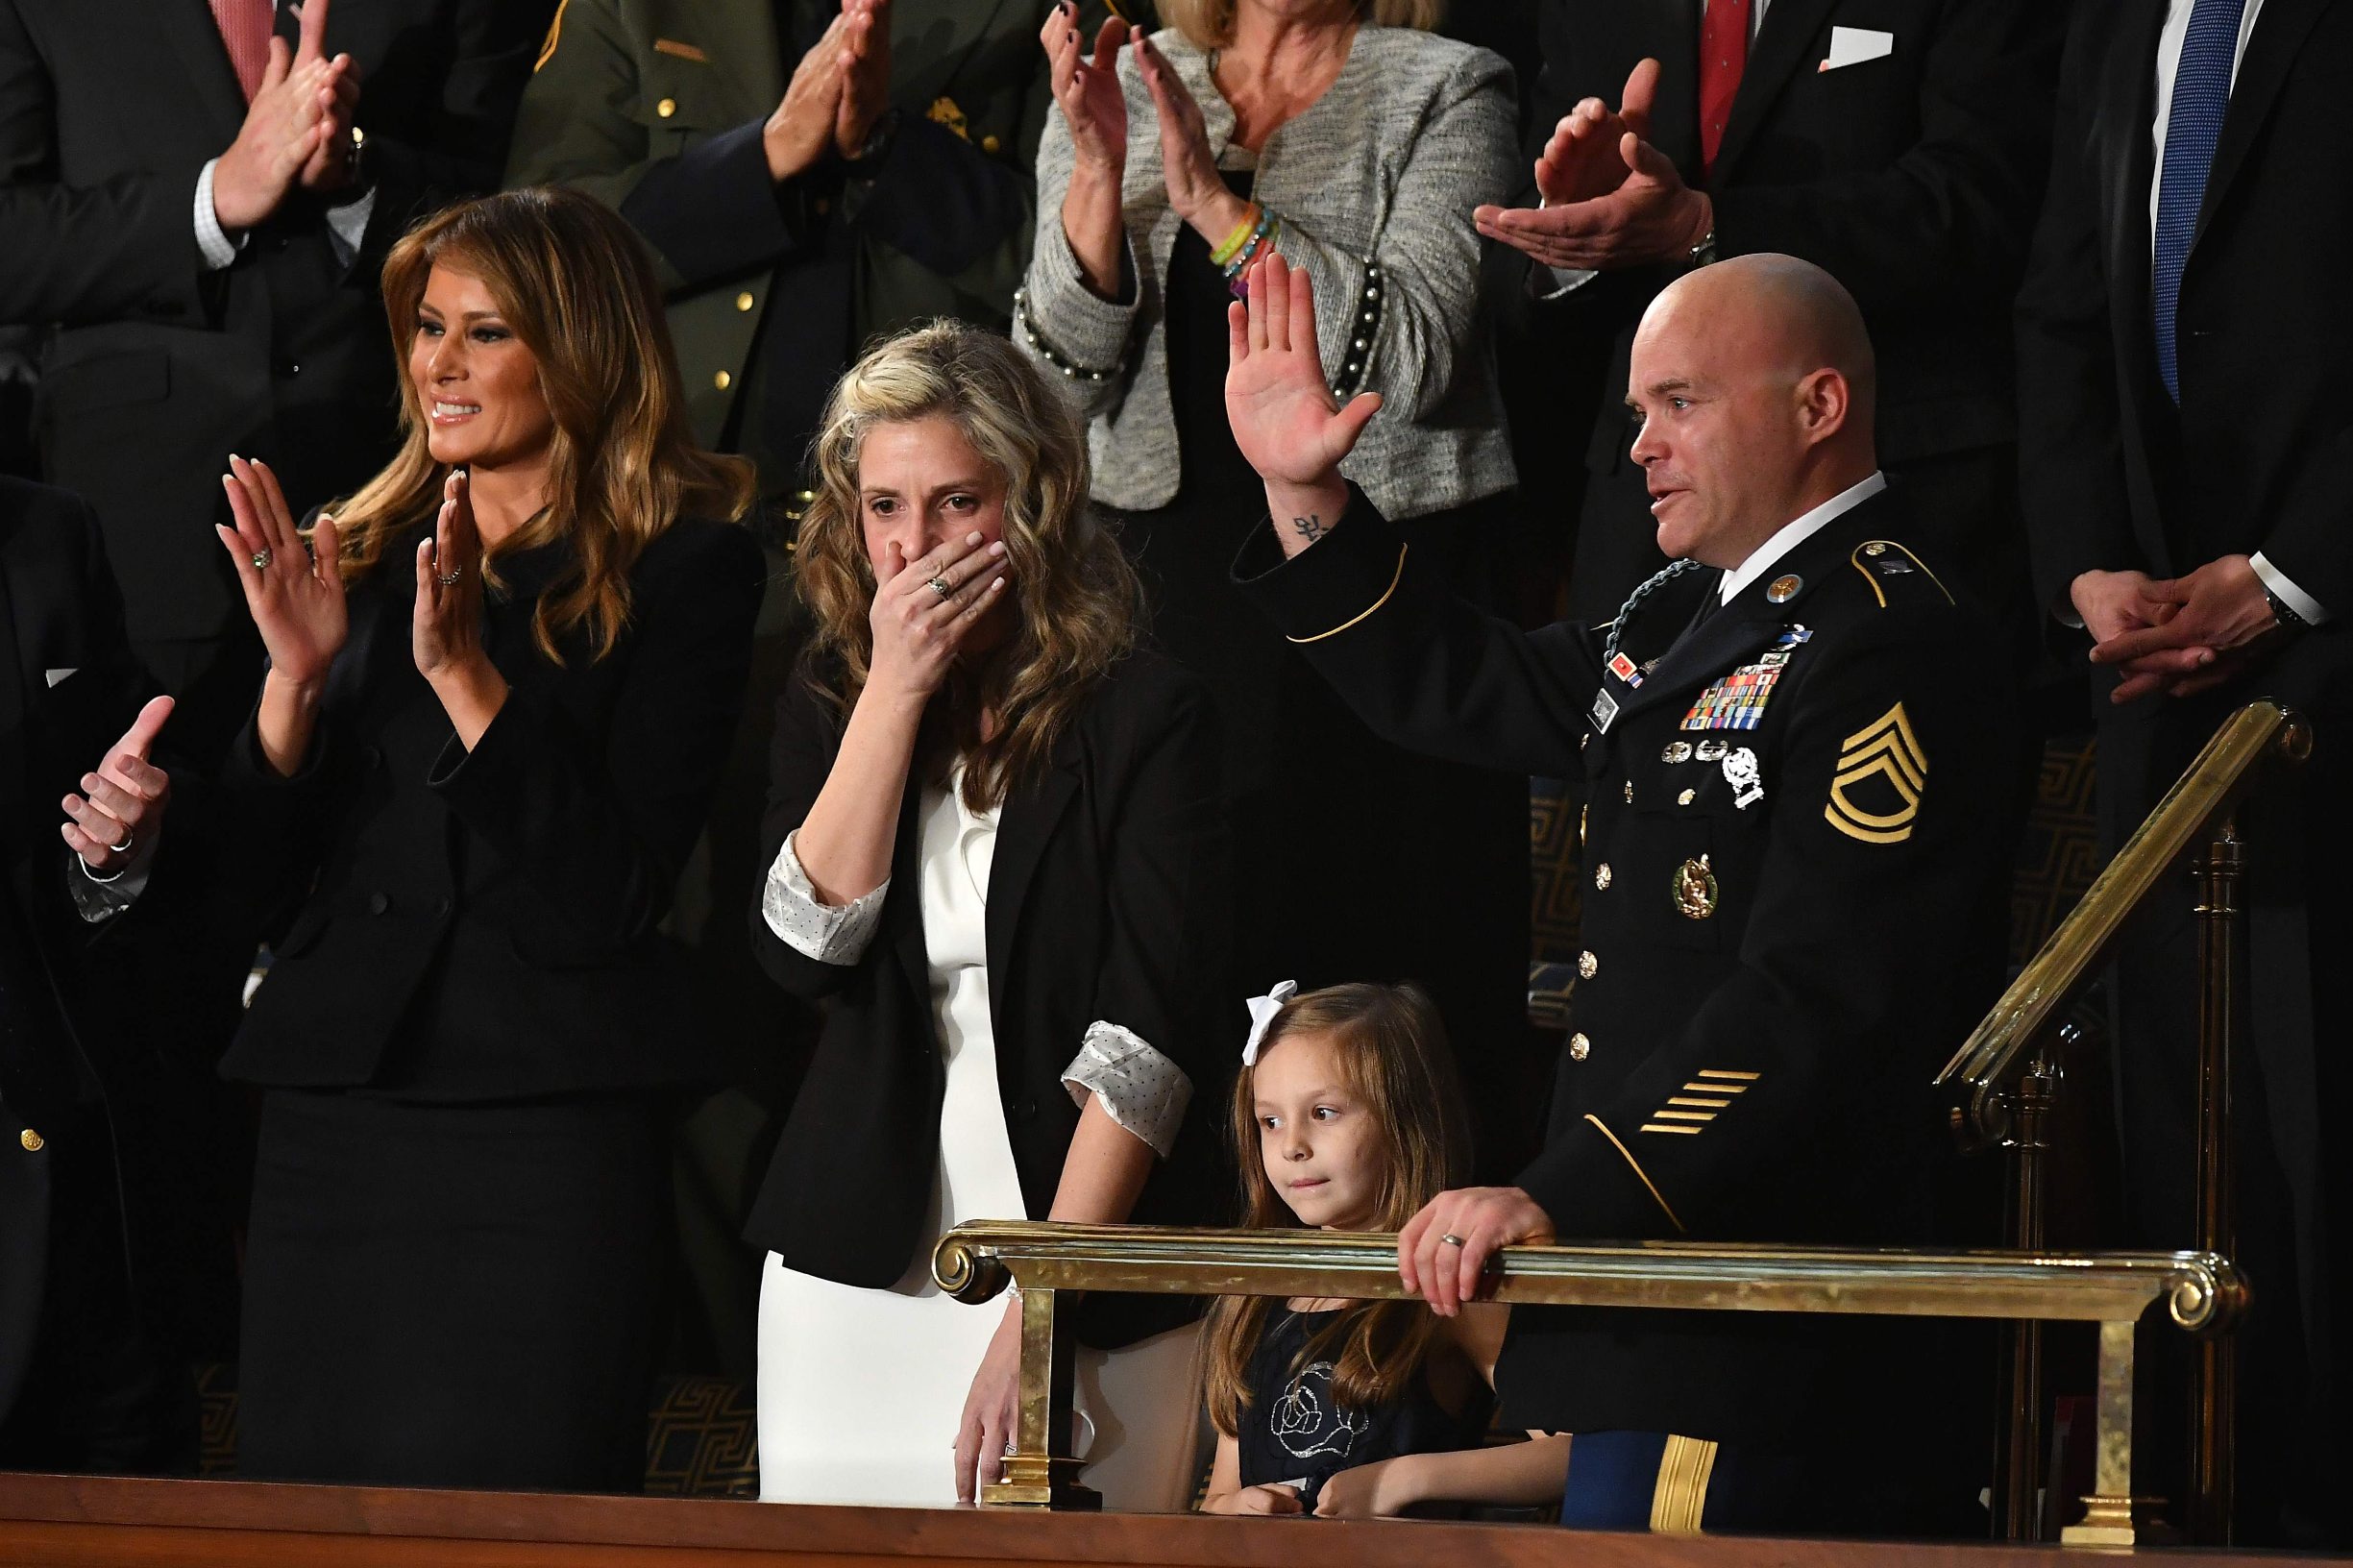 Sgt Townsend Williams (R) waves next to his children after returning from deployment in Afghanistan as his wife Amy (2L) looks on during the State of the Union address at the US Capitol in Washington, DC, on February 4, 2020. (Photo by MANDEL NGAN / AFP)